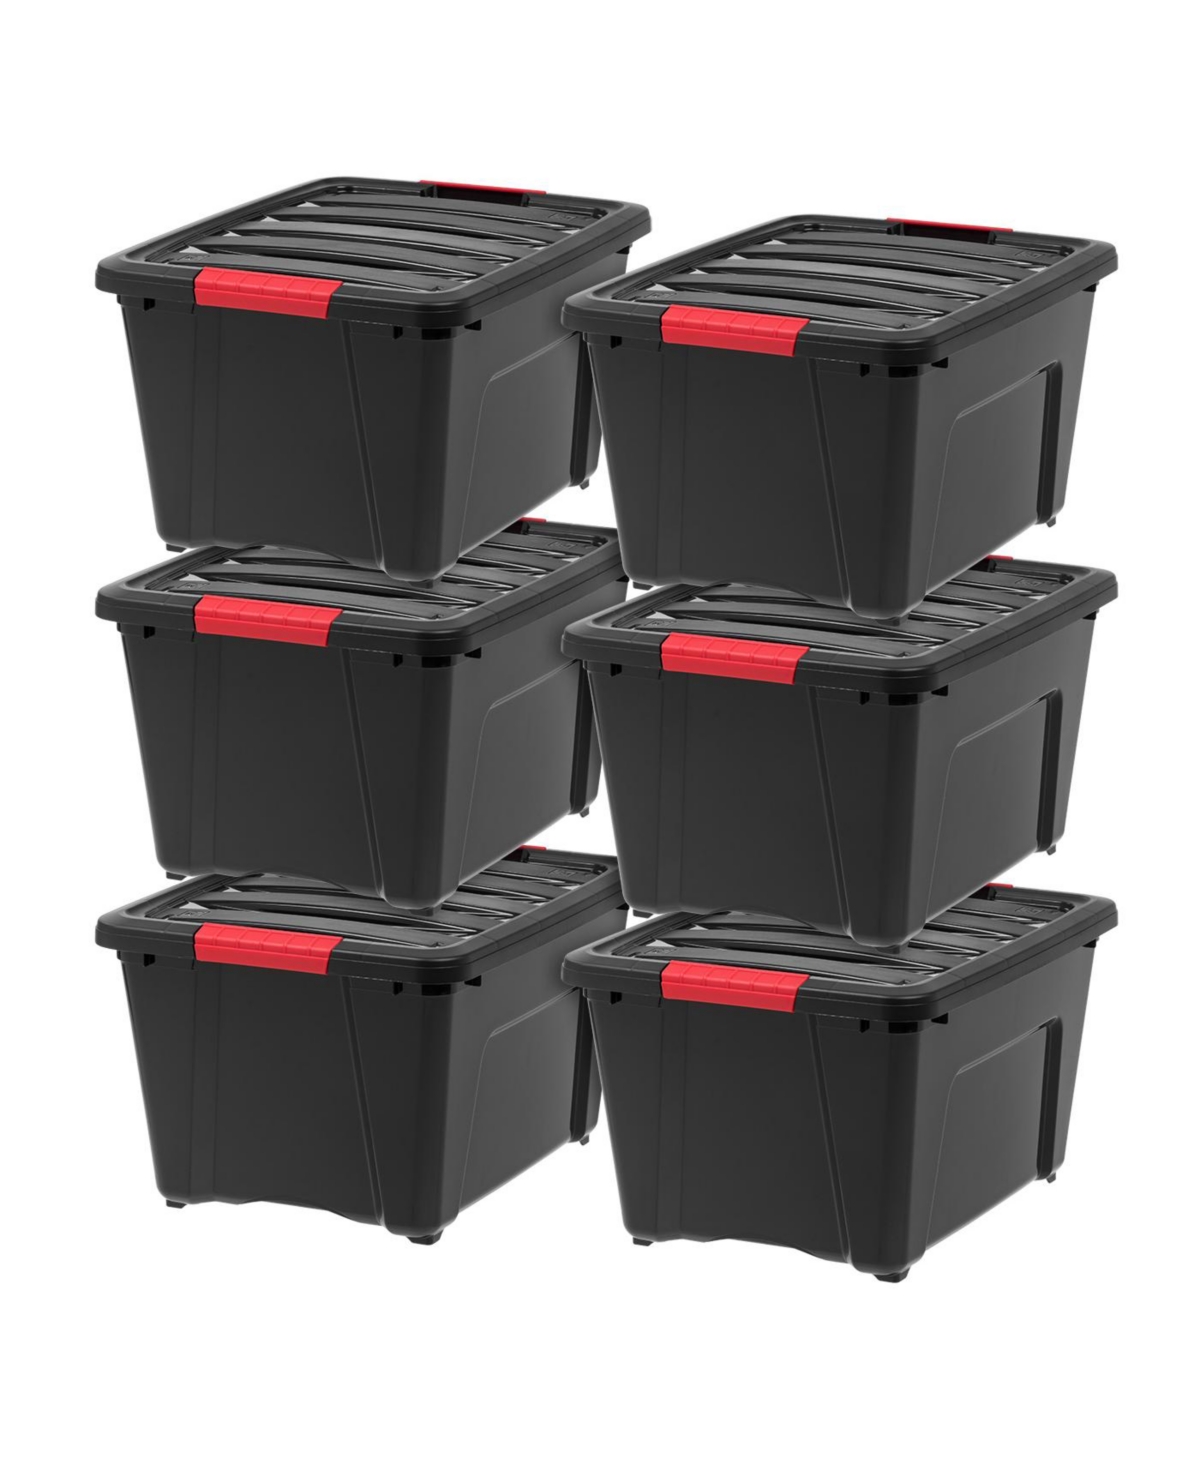 32 Qt Stackable Plastic Storage Bins with Lids, 6 Pack - Bpa-Free, Made in Usa - Garage Organizing Solution, Latches, Durable Nestable Contai